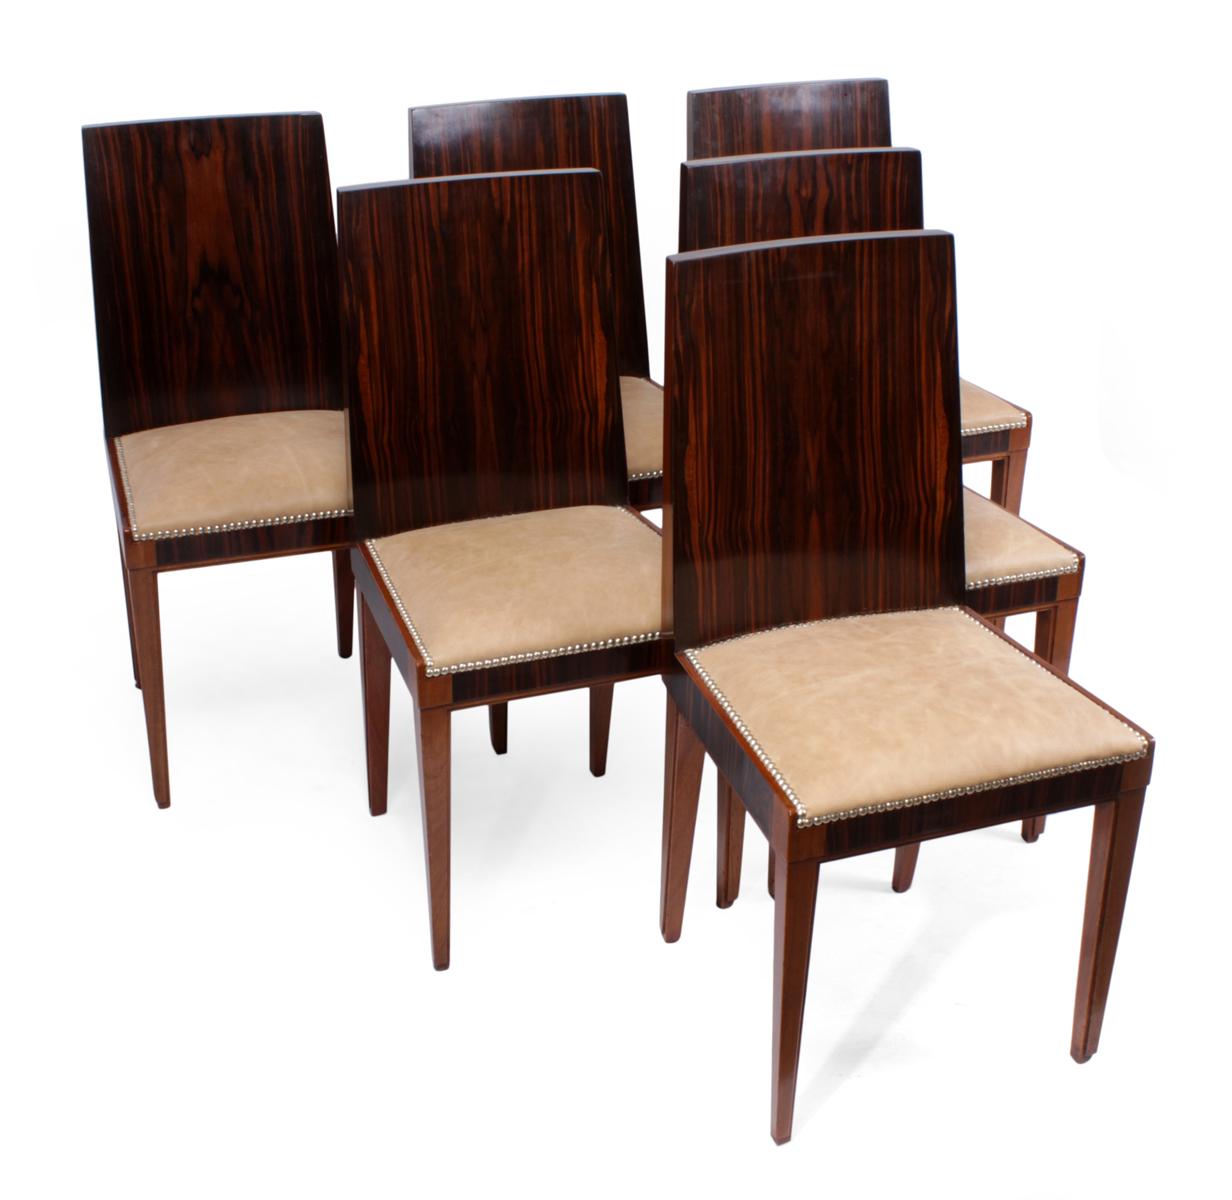 Art Deco Macassar ebony dining chairs
A set of six art deco Macassar ebony Dining chairs produced in France in the 1930s thy have a gently curved back with Macassar ebony front and back, the seat has been fully sprung and upholstered with new thick